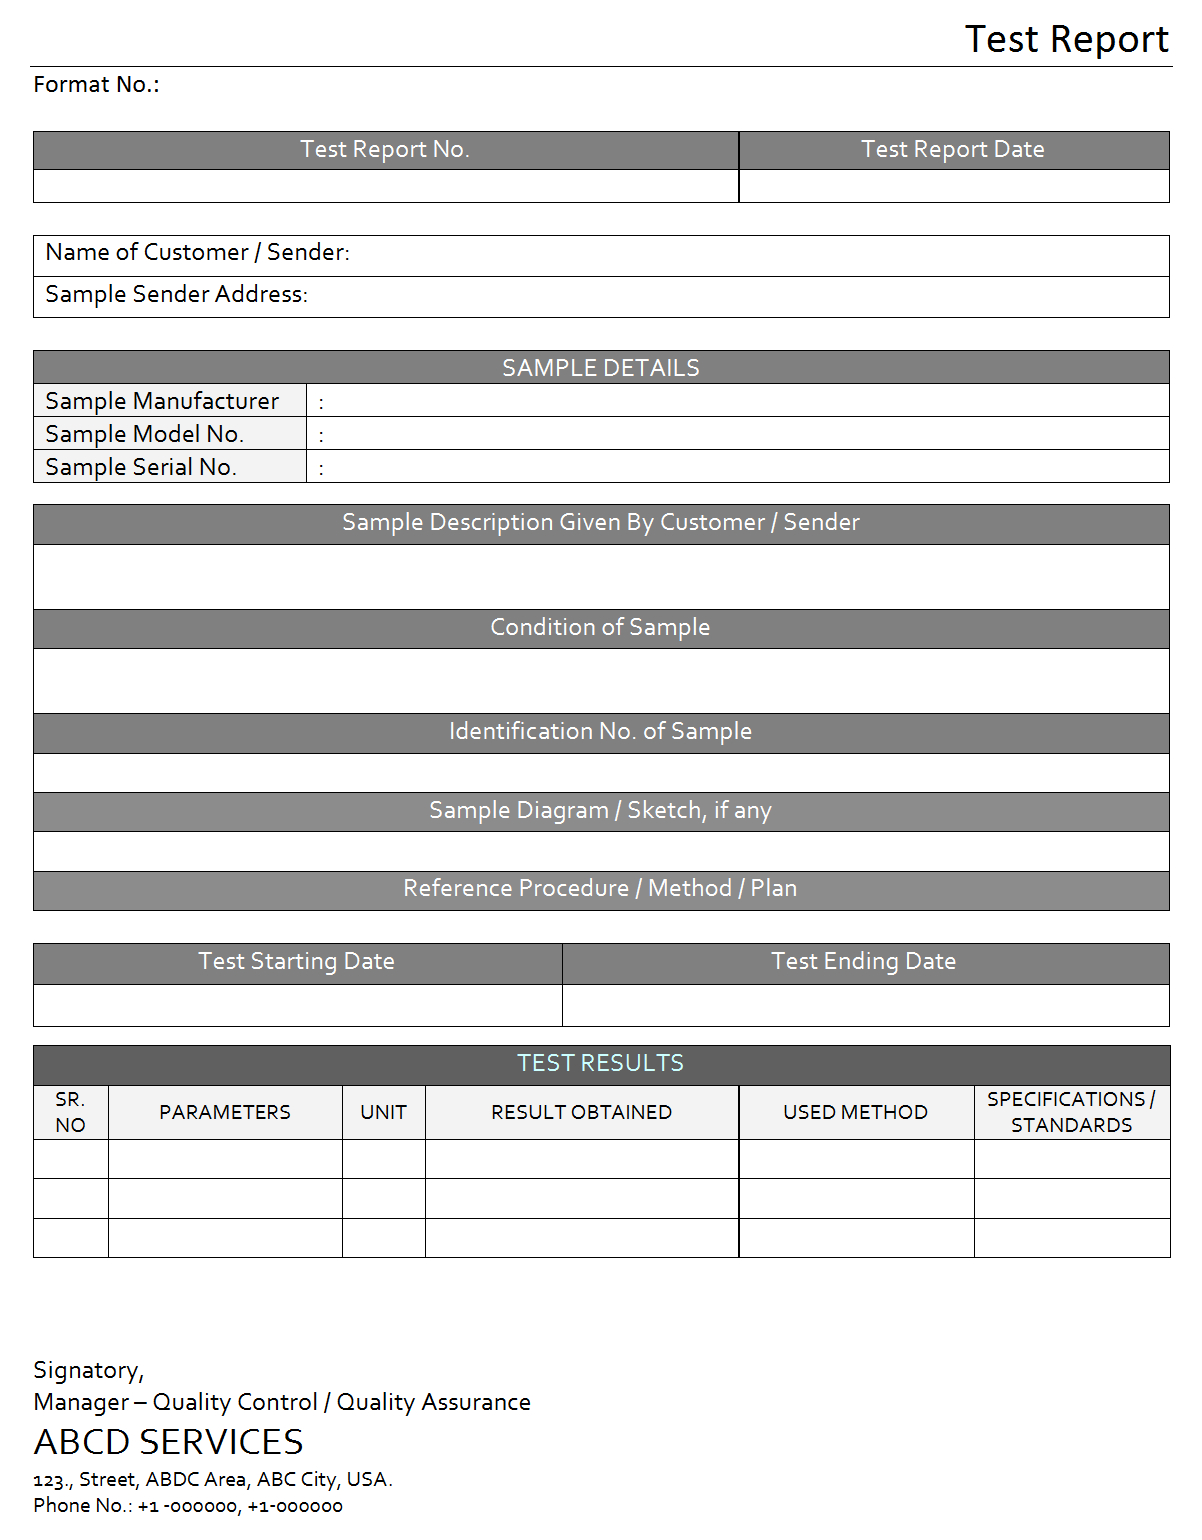 Test Report For Laboratory – Inside Test Result Report Template